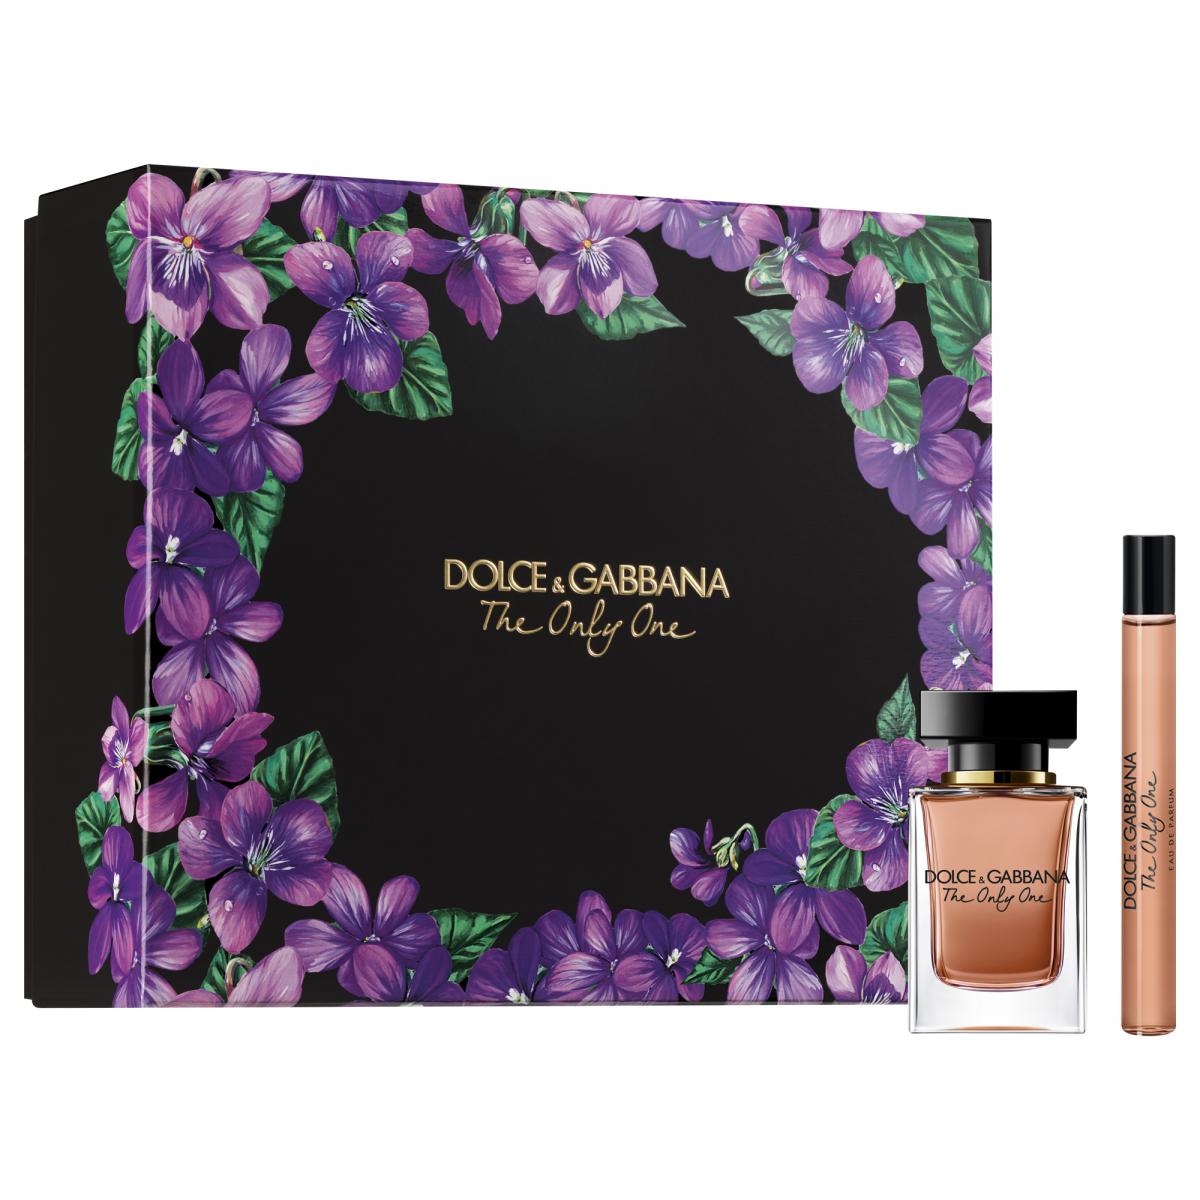 dolce and gabbana the one and only